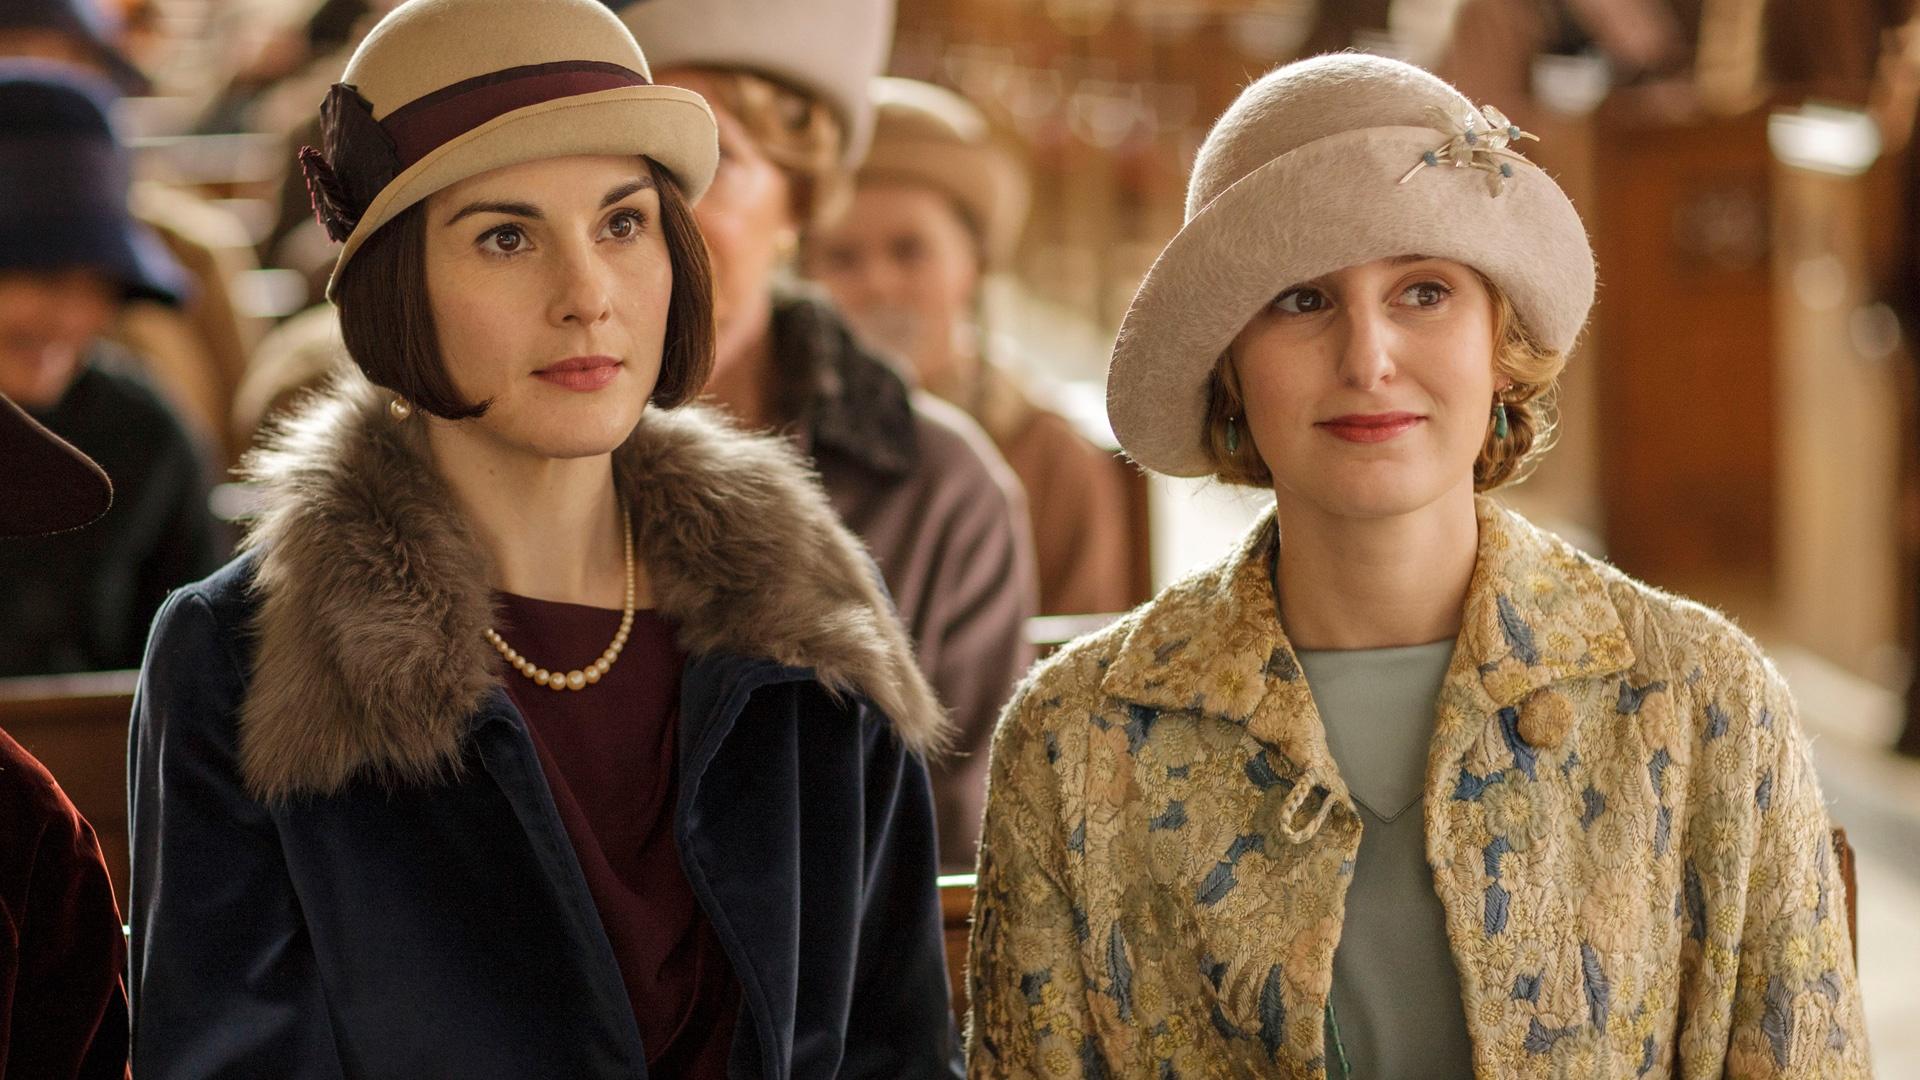 Watch Full Episodes Online of Masterpiece on PBS | Downton Abbey ...